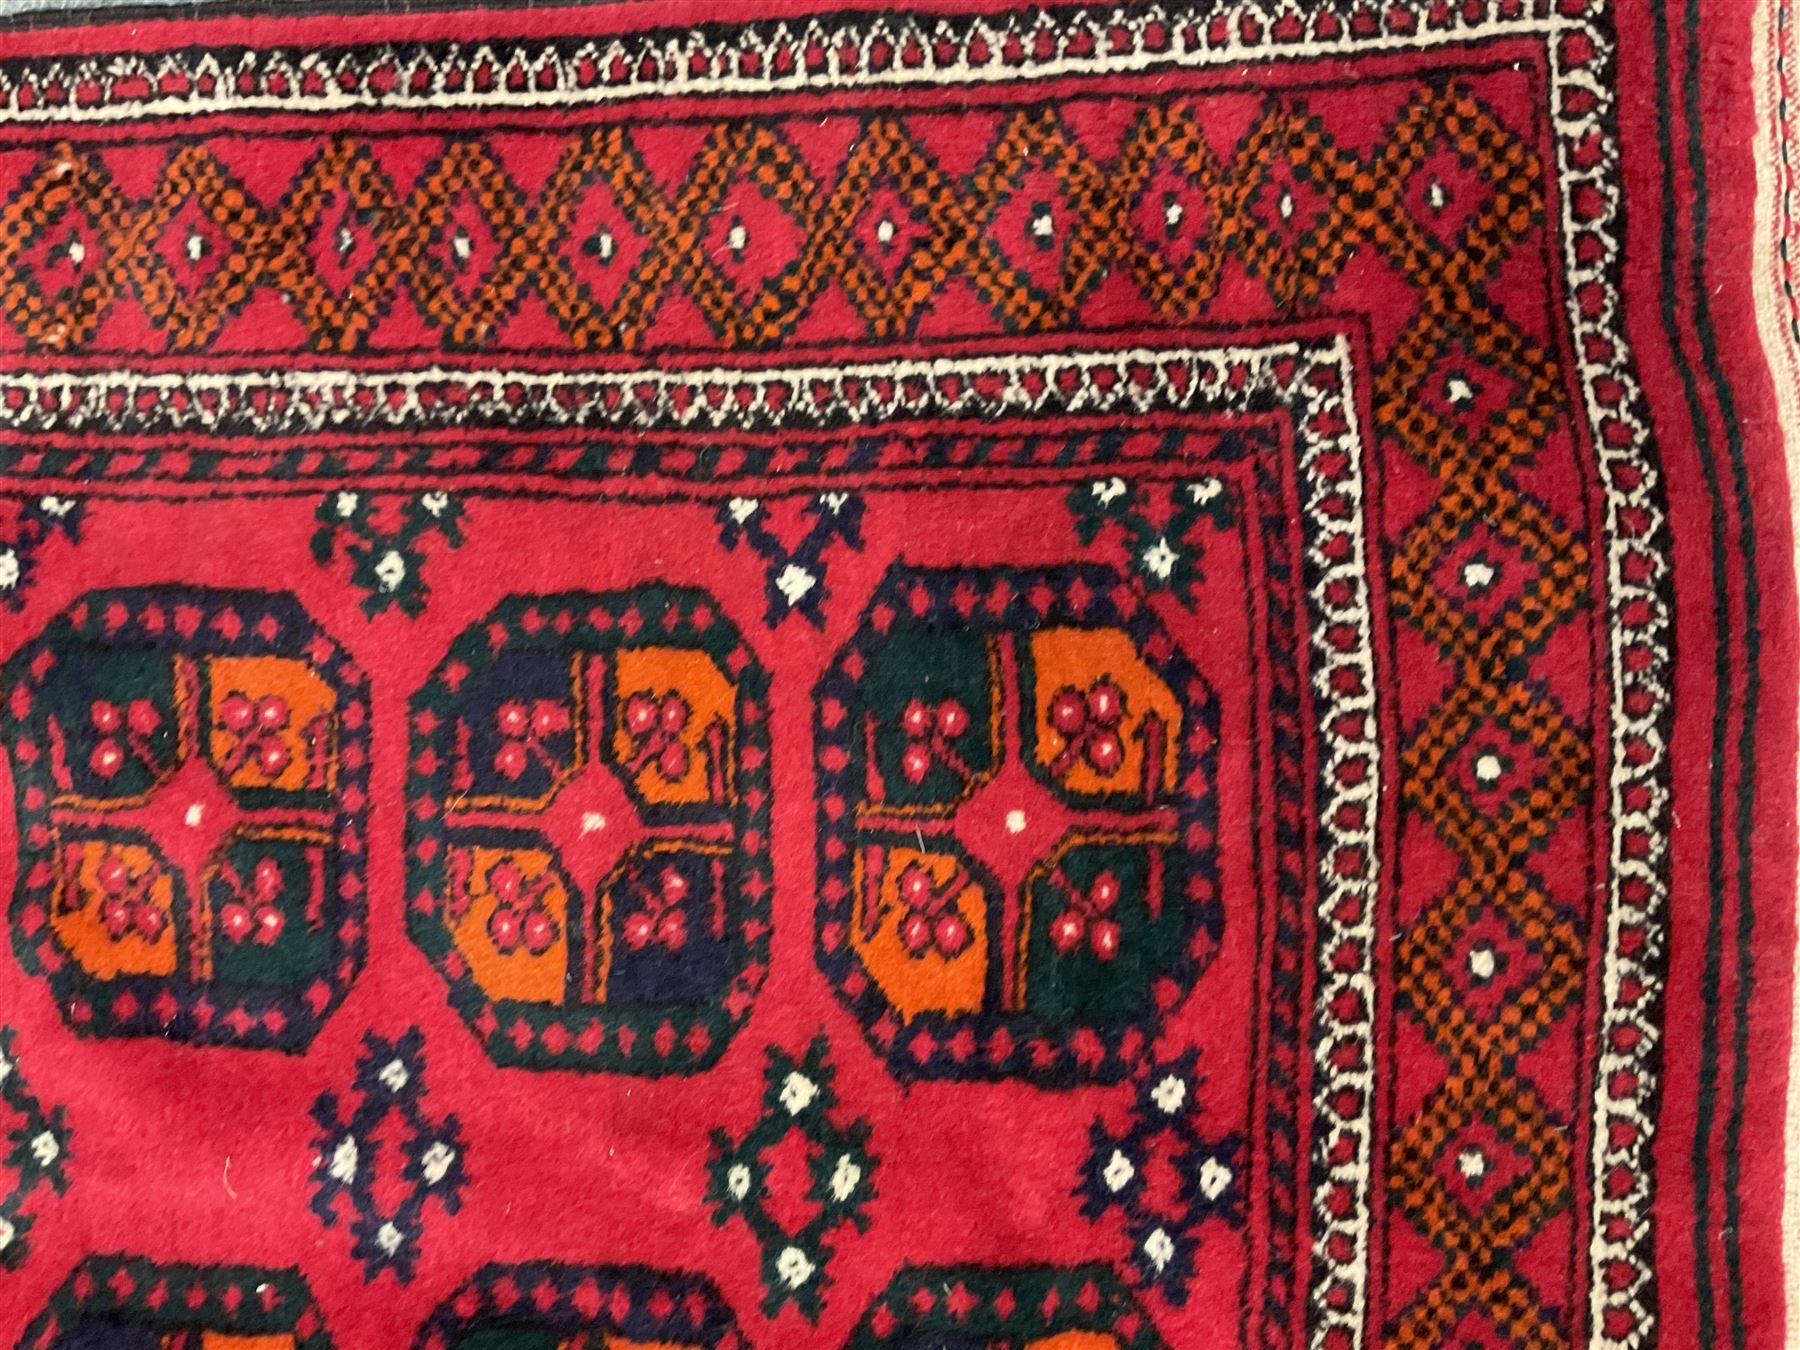 Two small Persian red ground rugs (122cm x 80cm and 111cm x 86cm) - Image 4 of 5